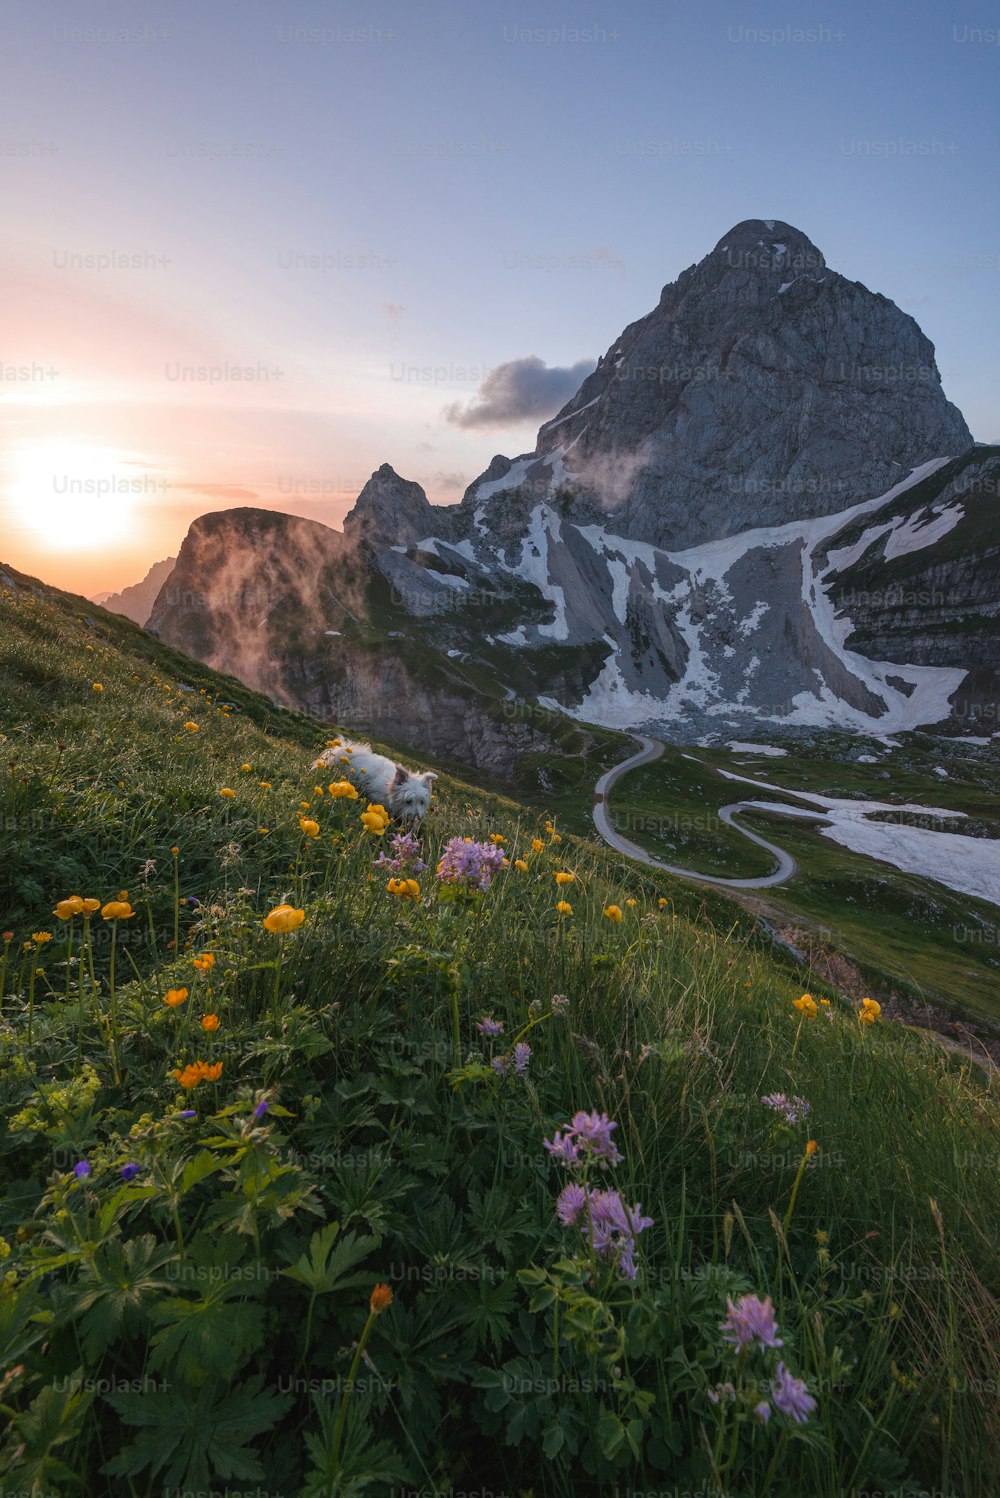 the sun is setting over a mountain with wildflowers in the foreground